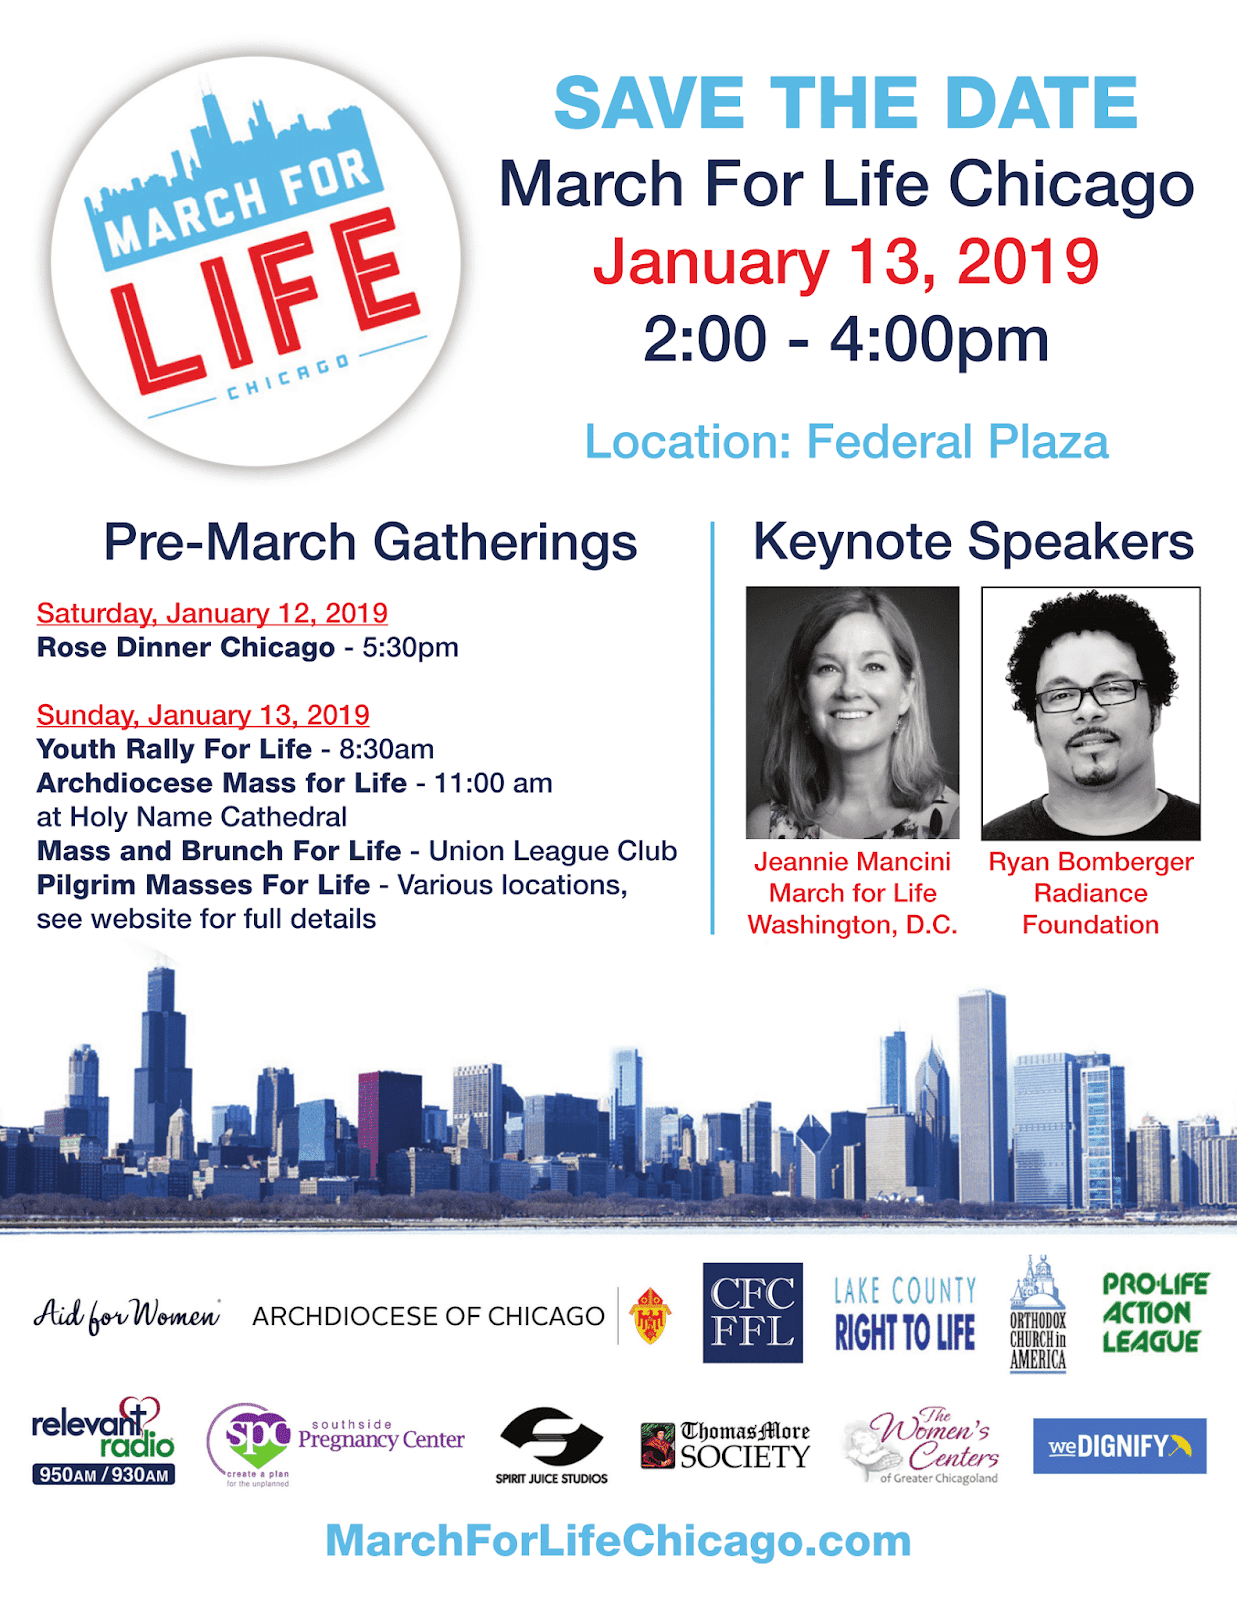 Illinois Federation for Right to Life: March for Life Chicago 20191237 x 1600